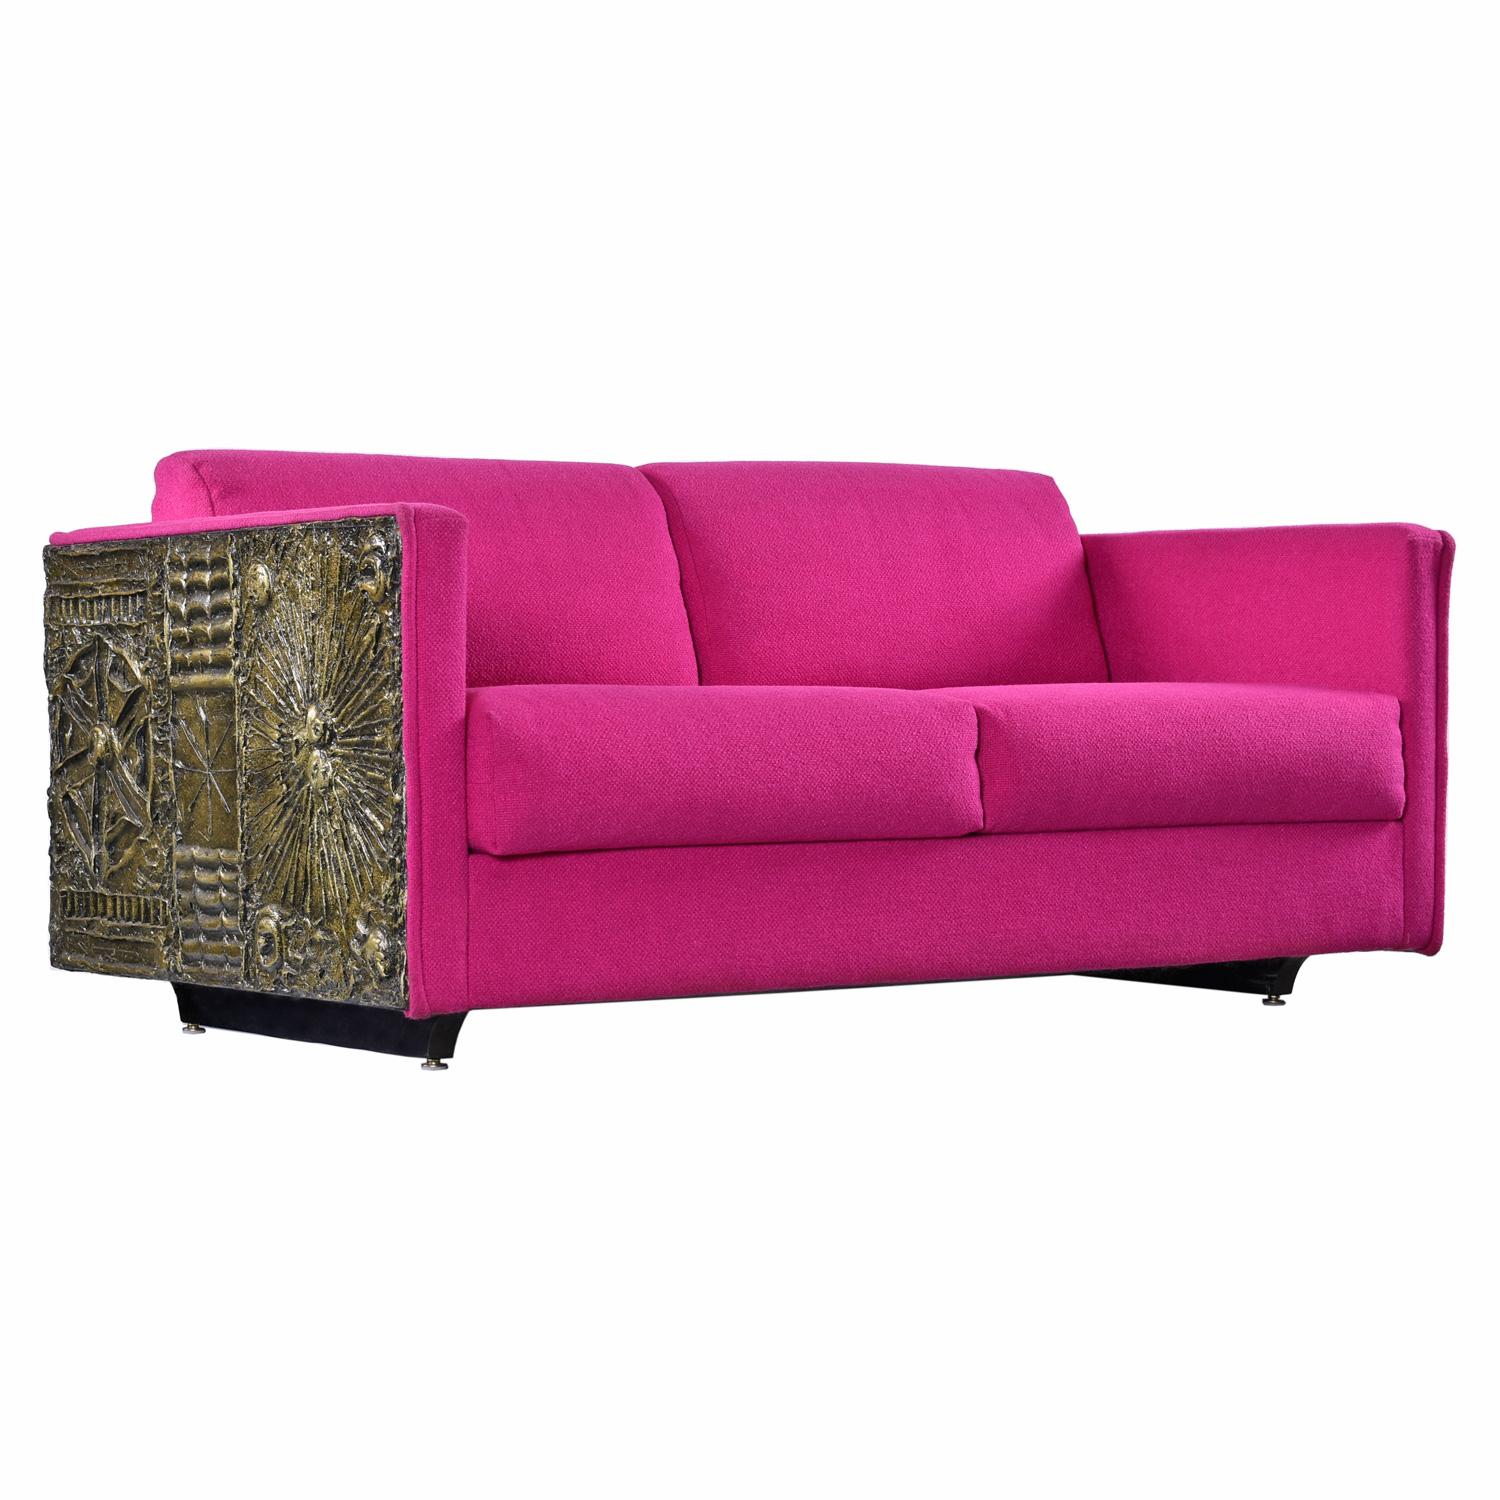 You won't find a nicer original version of this Adrian Pearsall Brutalist loveseat sofa anywhere.  That's right, this magnificent pink wool fabric was hand picked by the original owner and the Craft Associates tags are still on most of the cushions.